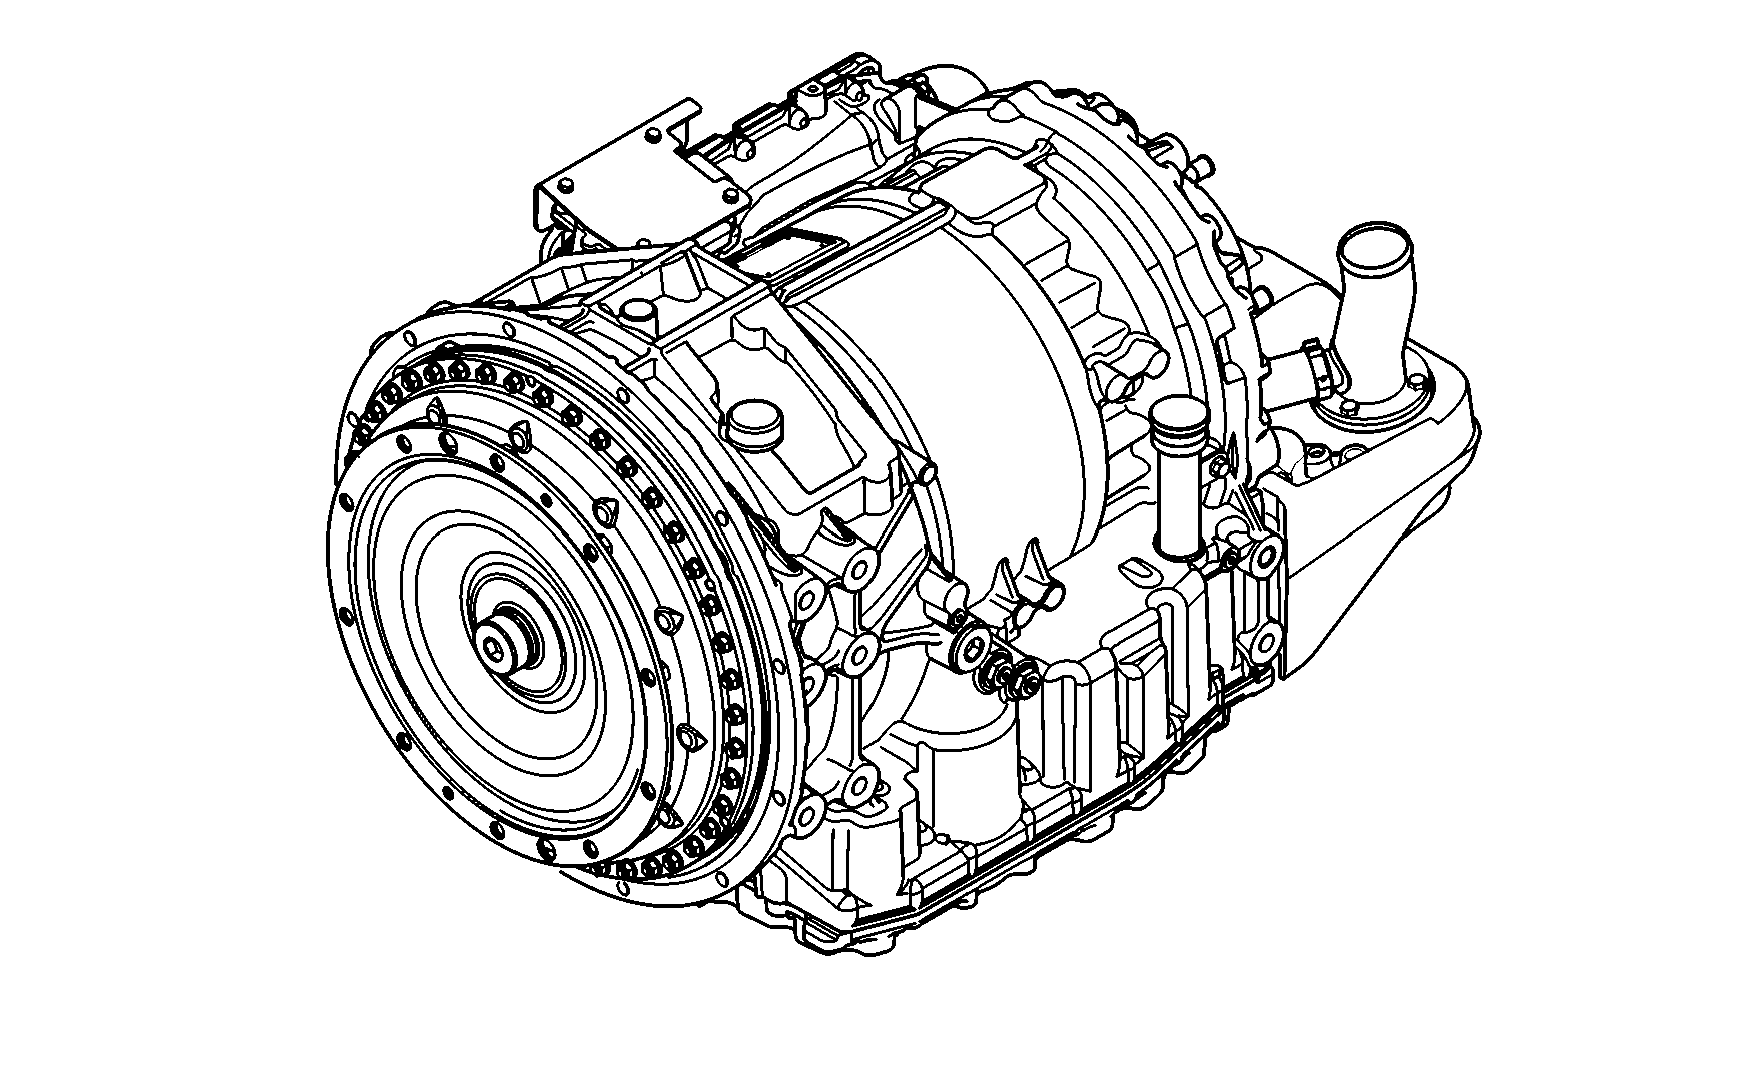 drawing for SCANIA 2260652 - 6 AP 1200 B (figure 1)